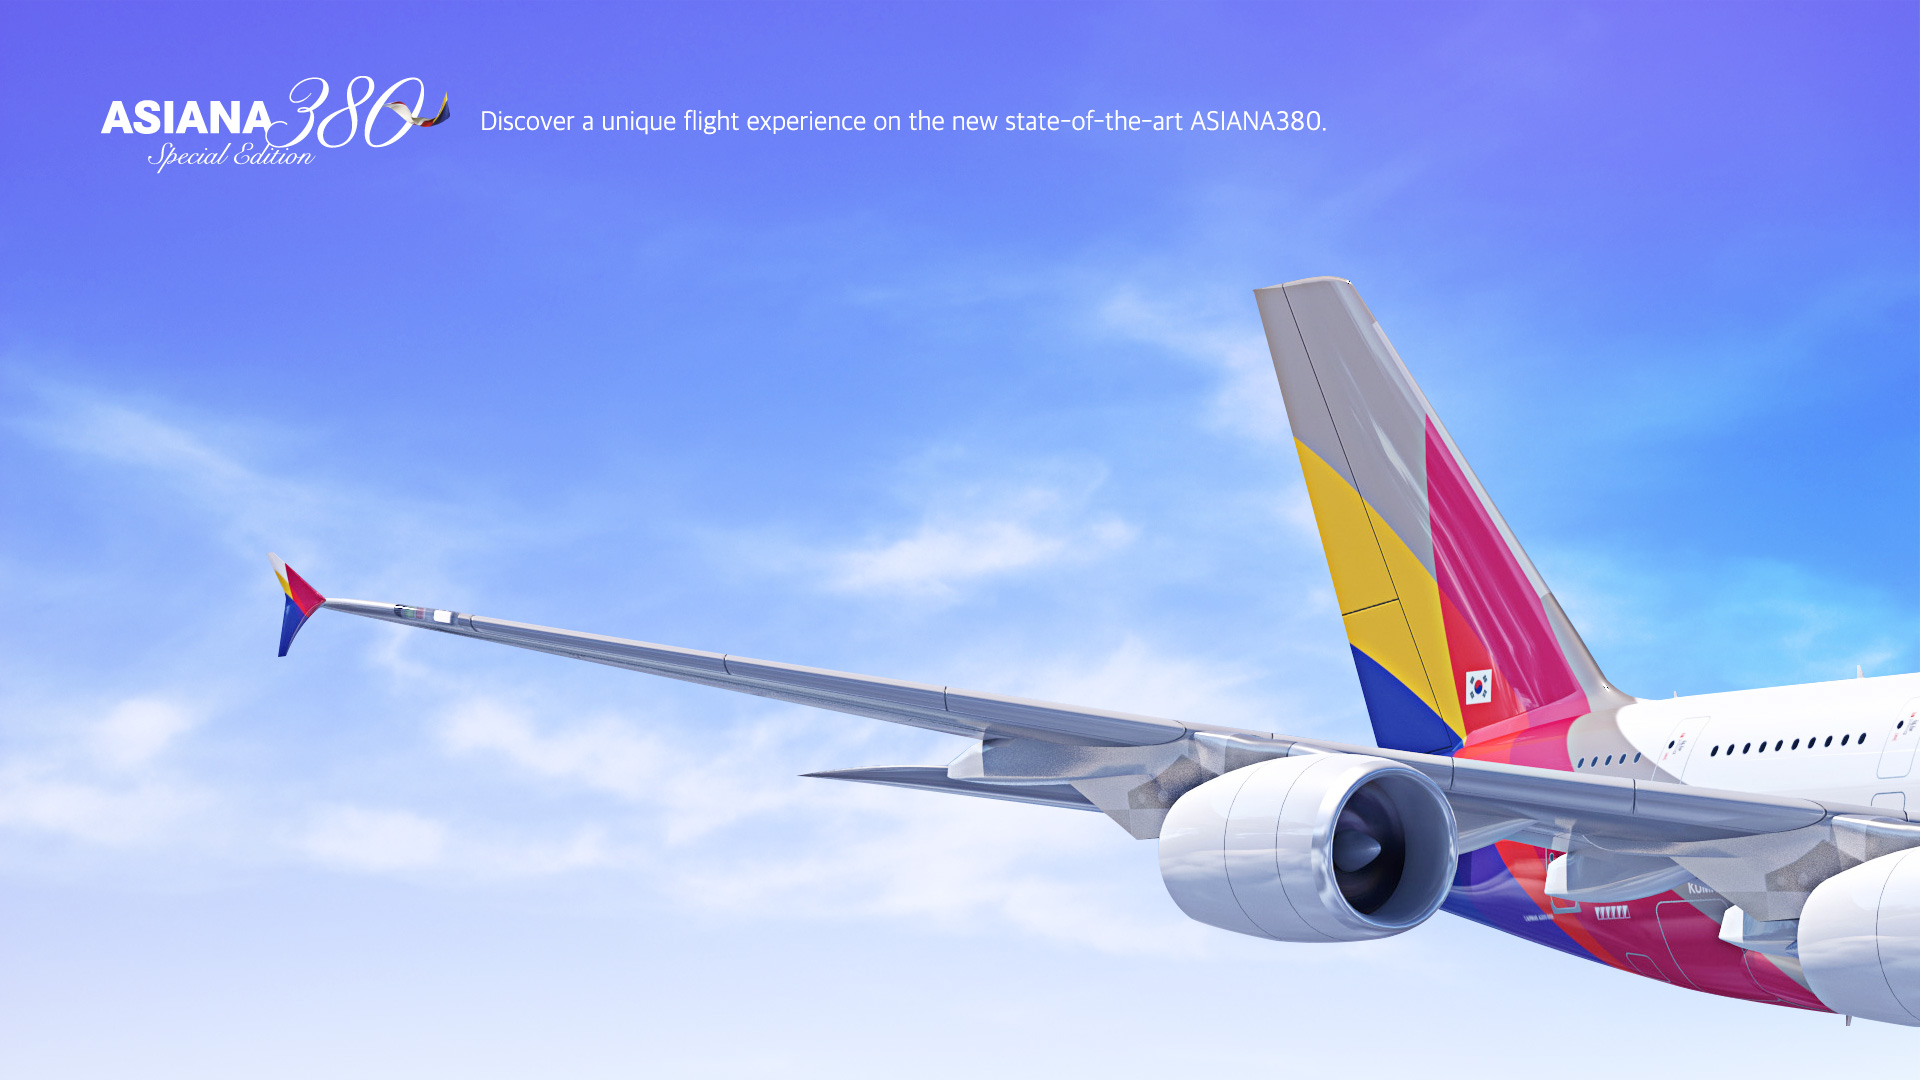 The Story of Asiana Airlines’ Airbus A380